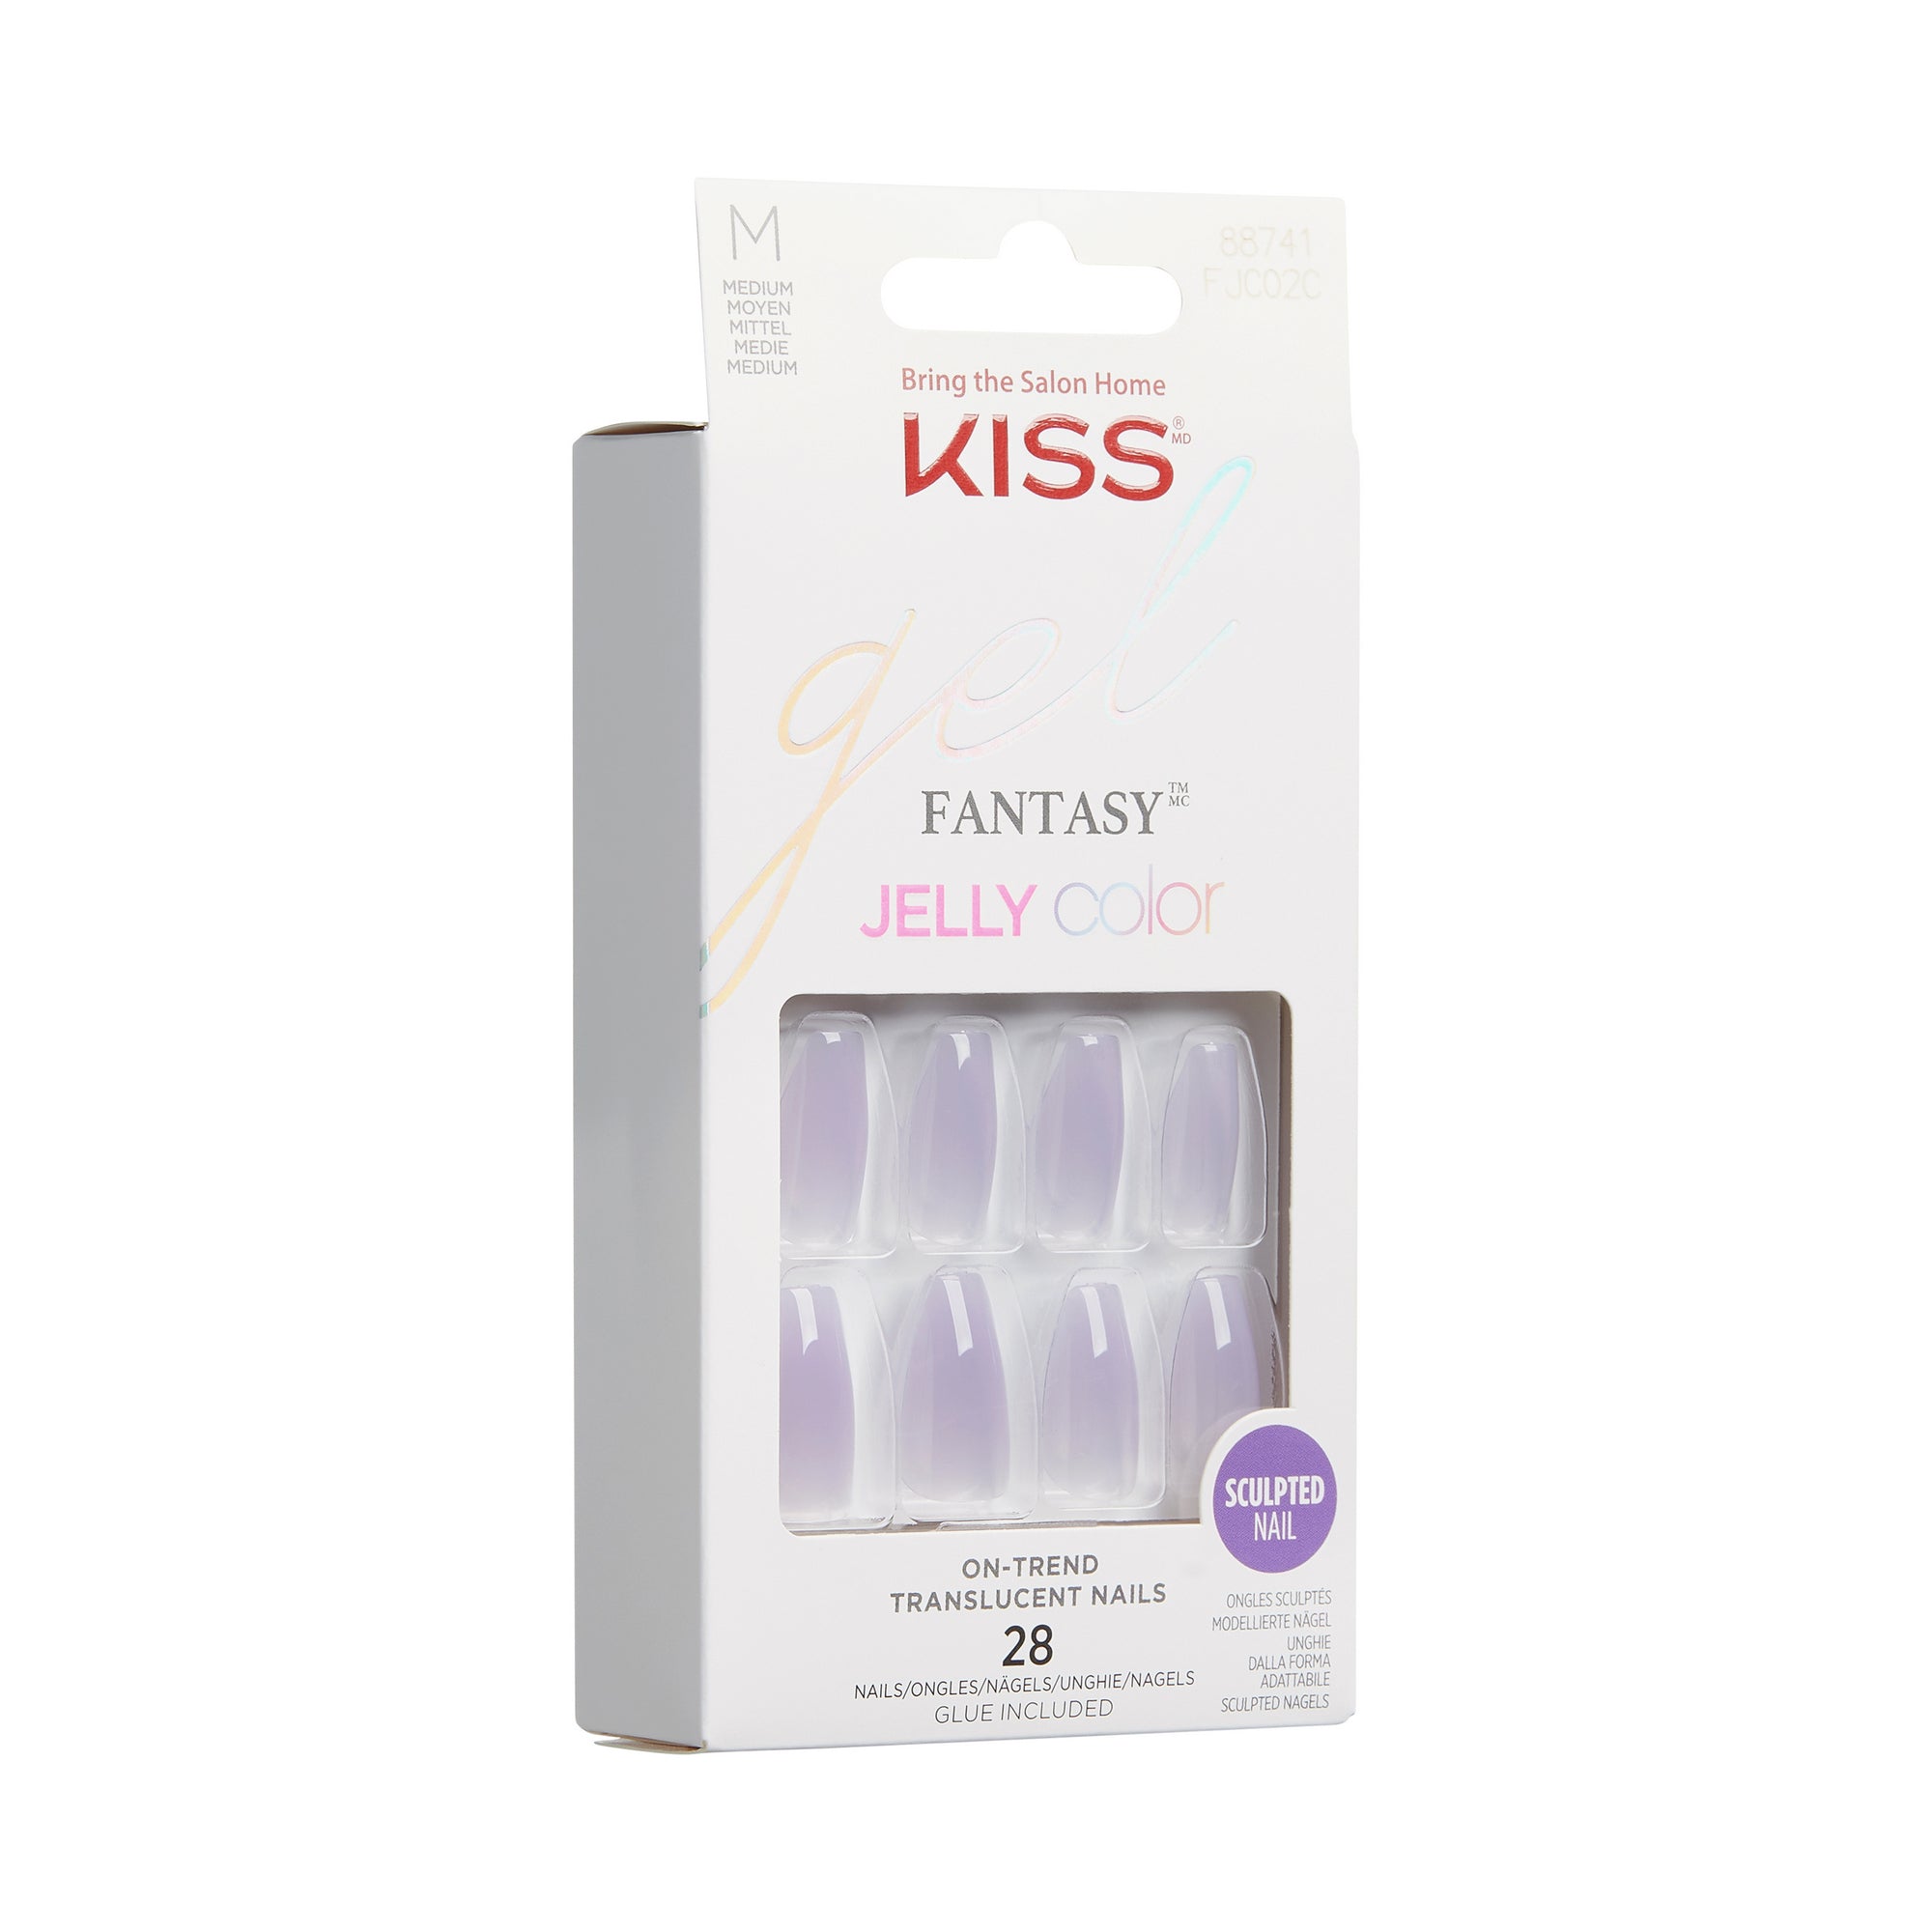 KISS JELLY FANTASY NAILS JELLY QUINCE JELLY Packshot 2